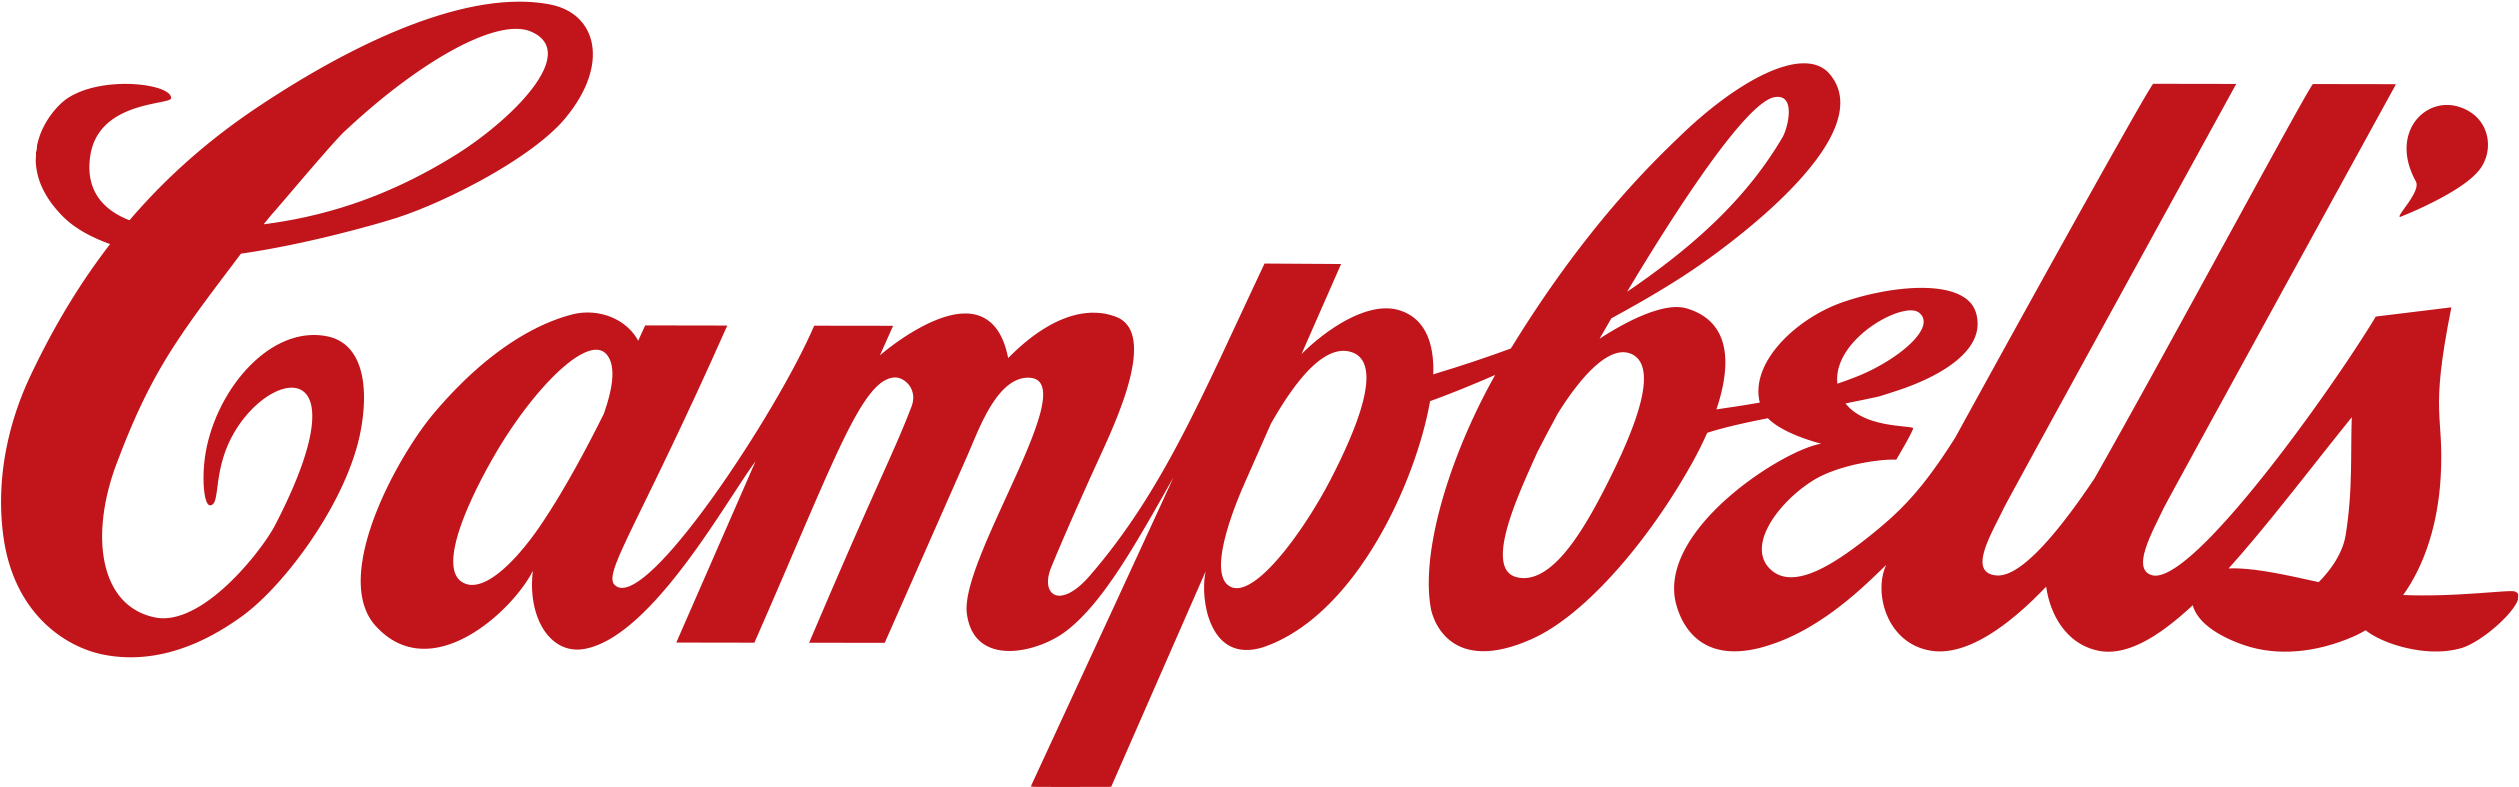 Campbell’s Logo PNG